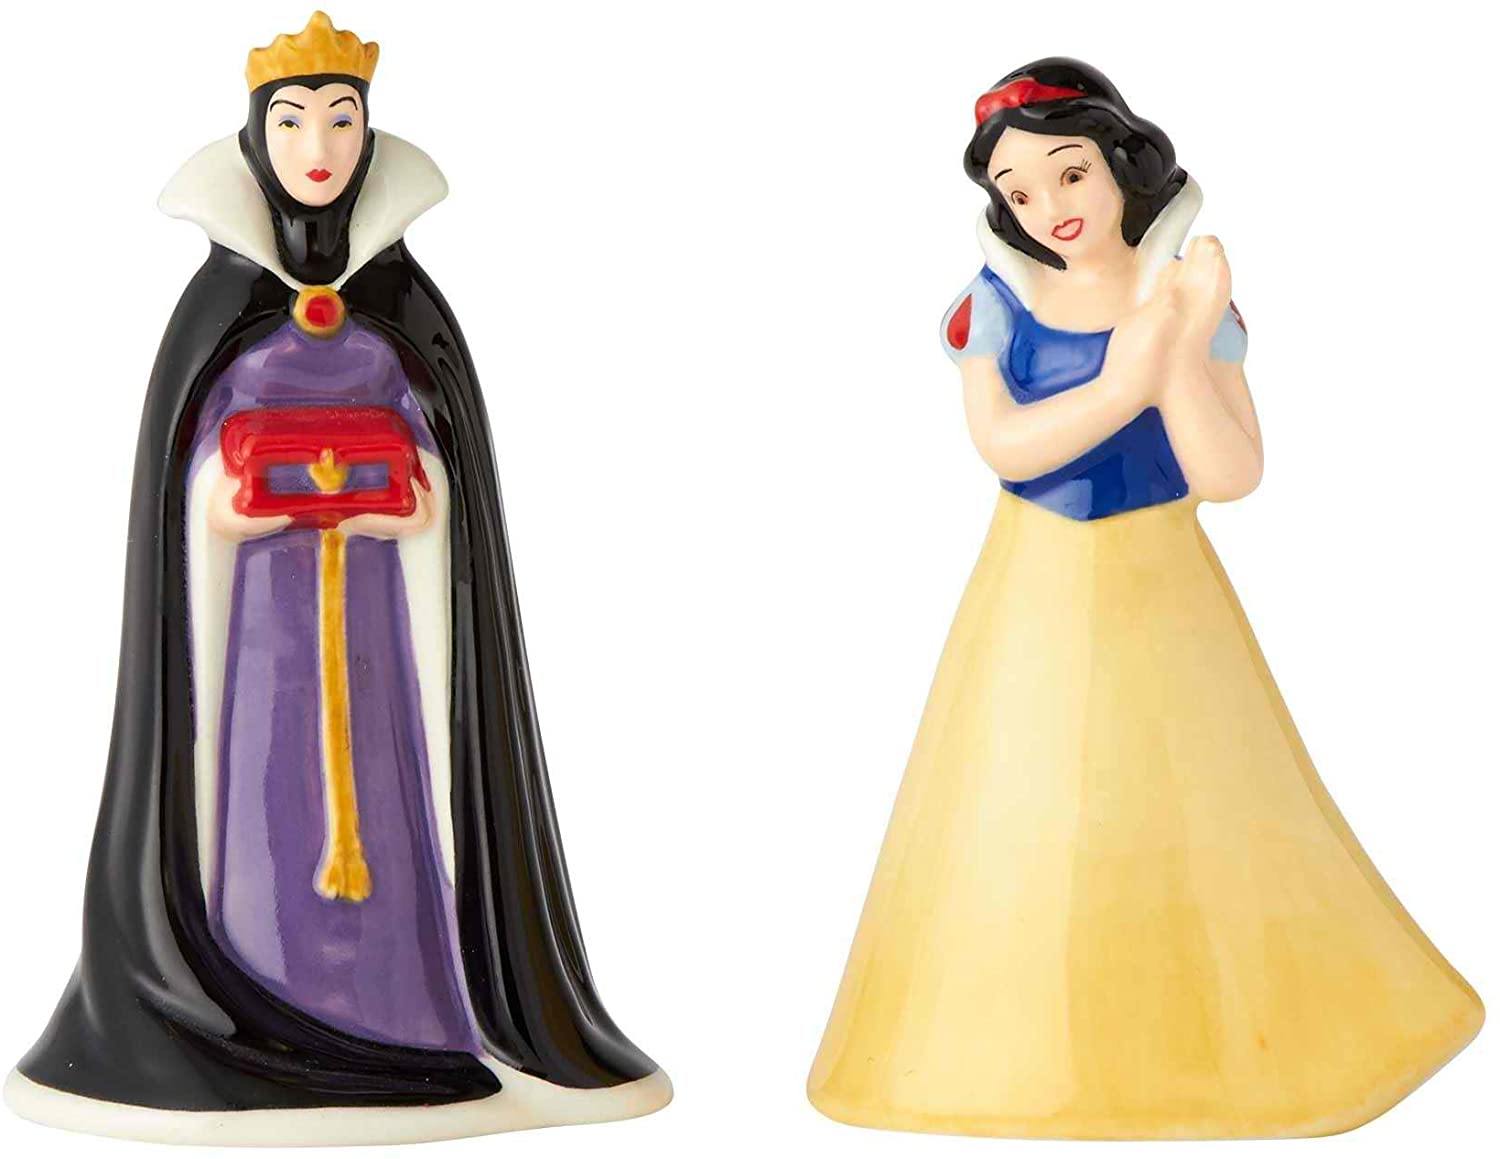 Disney's Snow White and Evil Queen Salt and Pepper Shakers